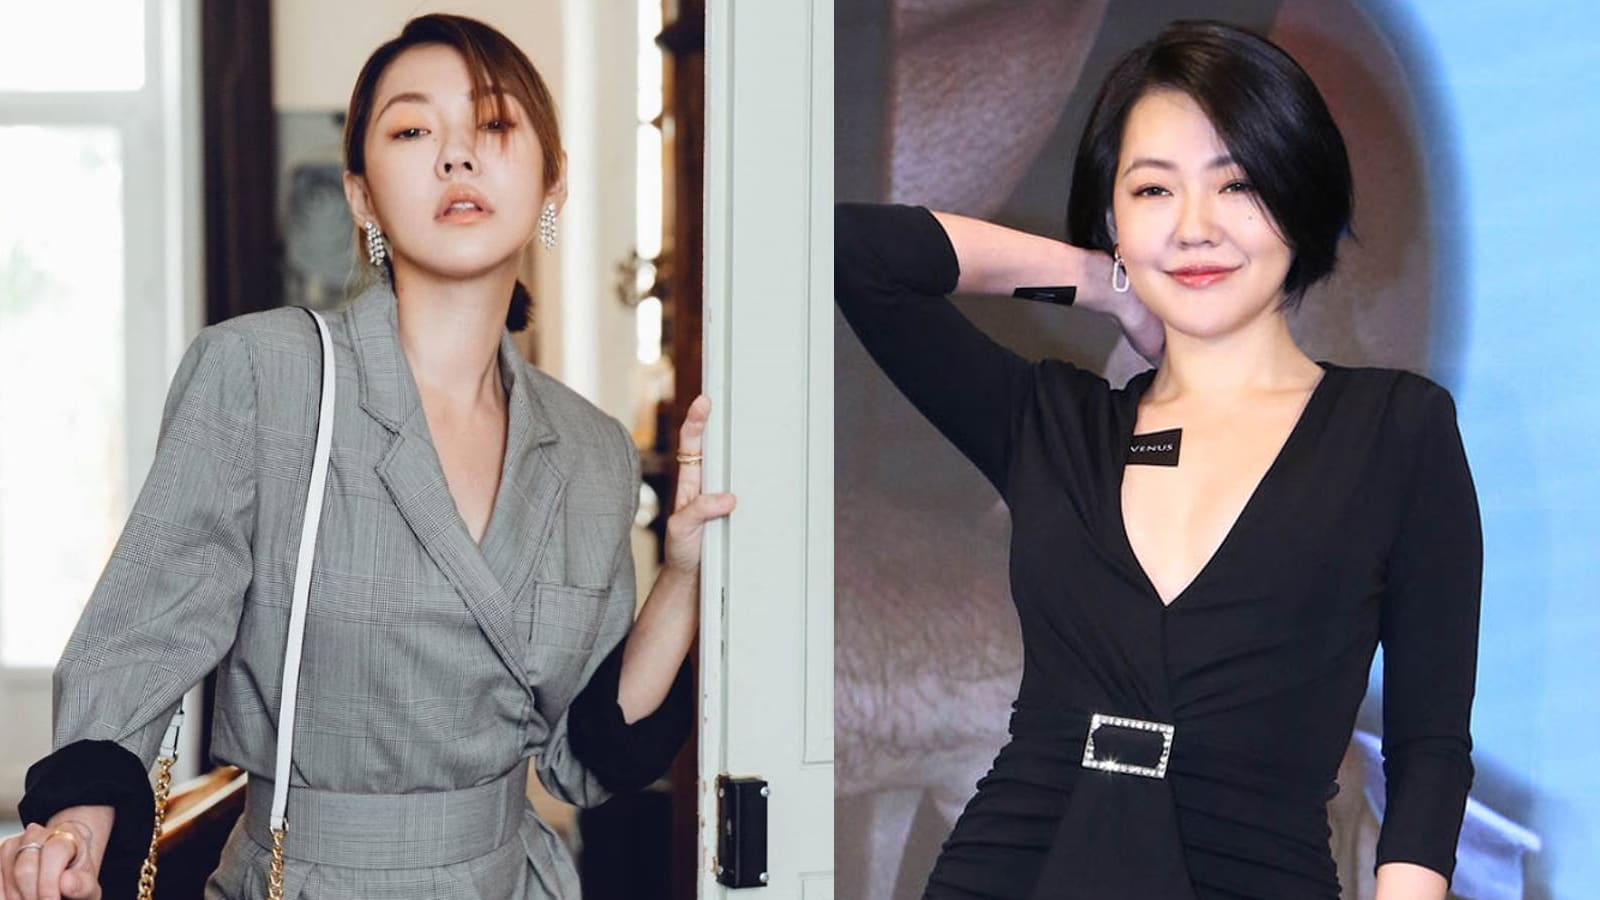 Dee Hsu Wants Women To Ignore Questions Like “Why Aren’t You Married At Your Age?”